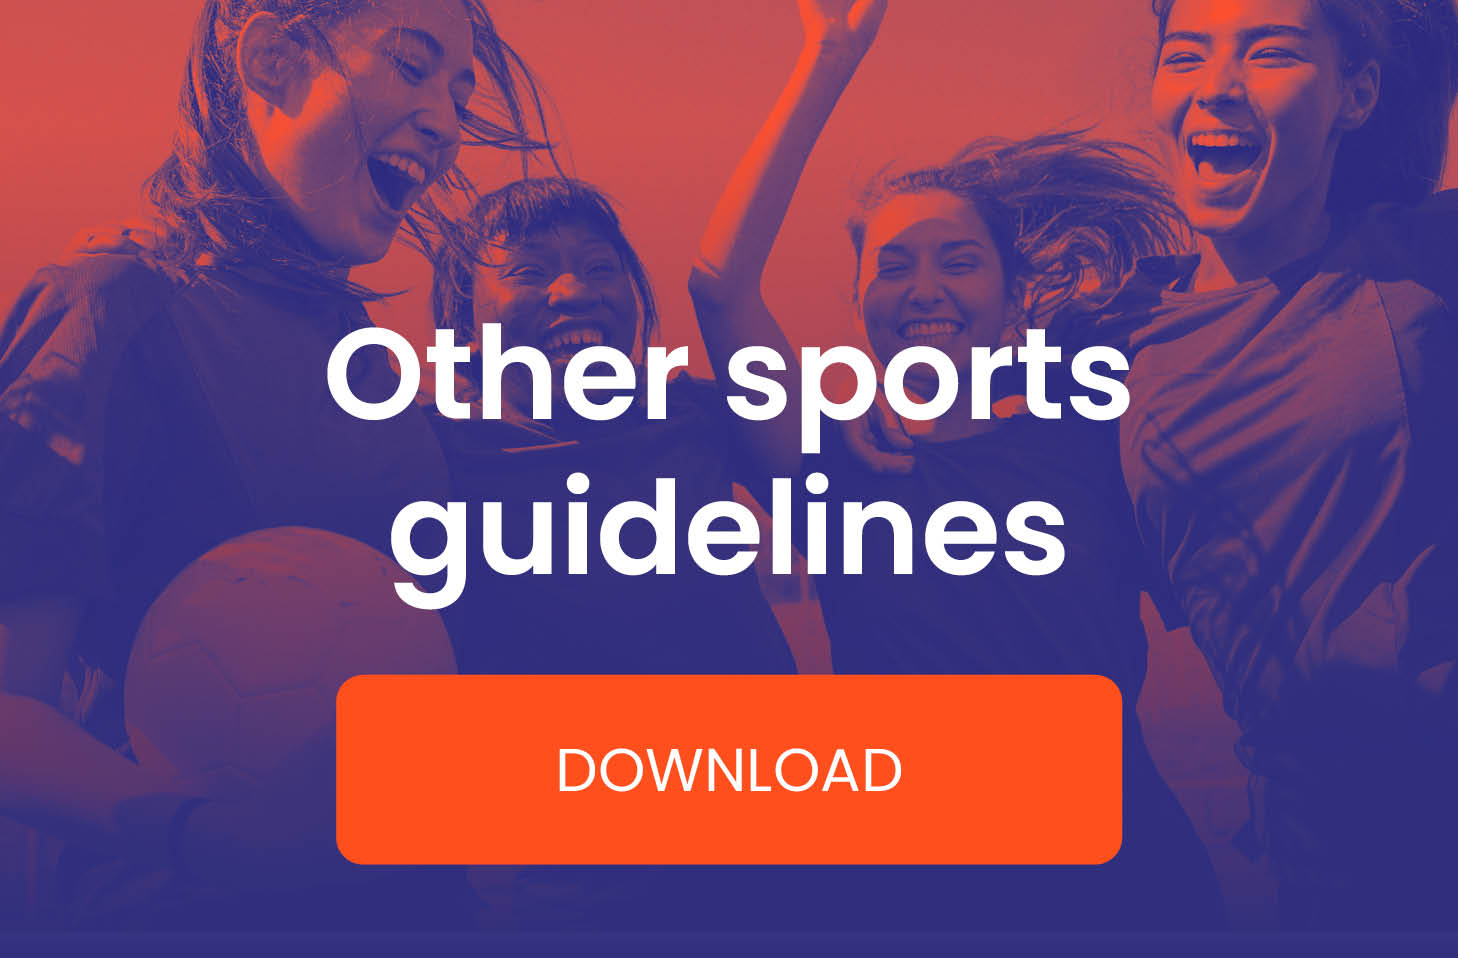 Other sports guidelines - download